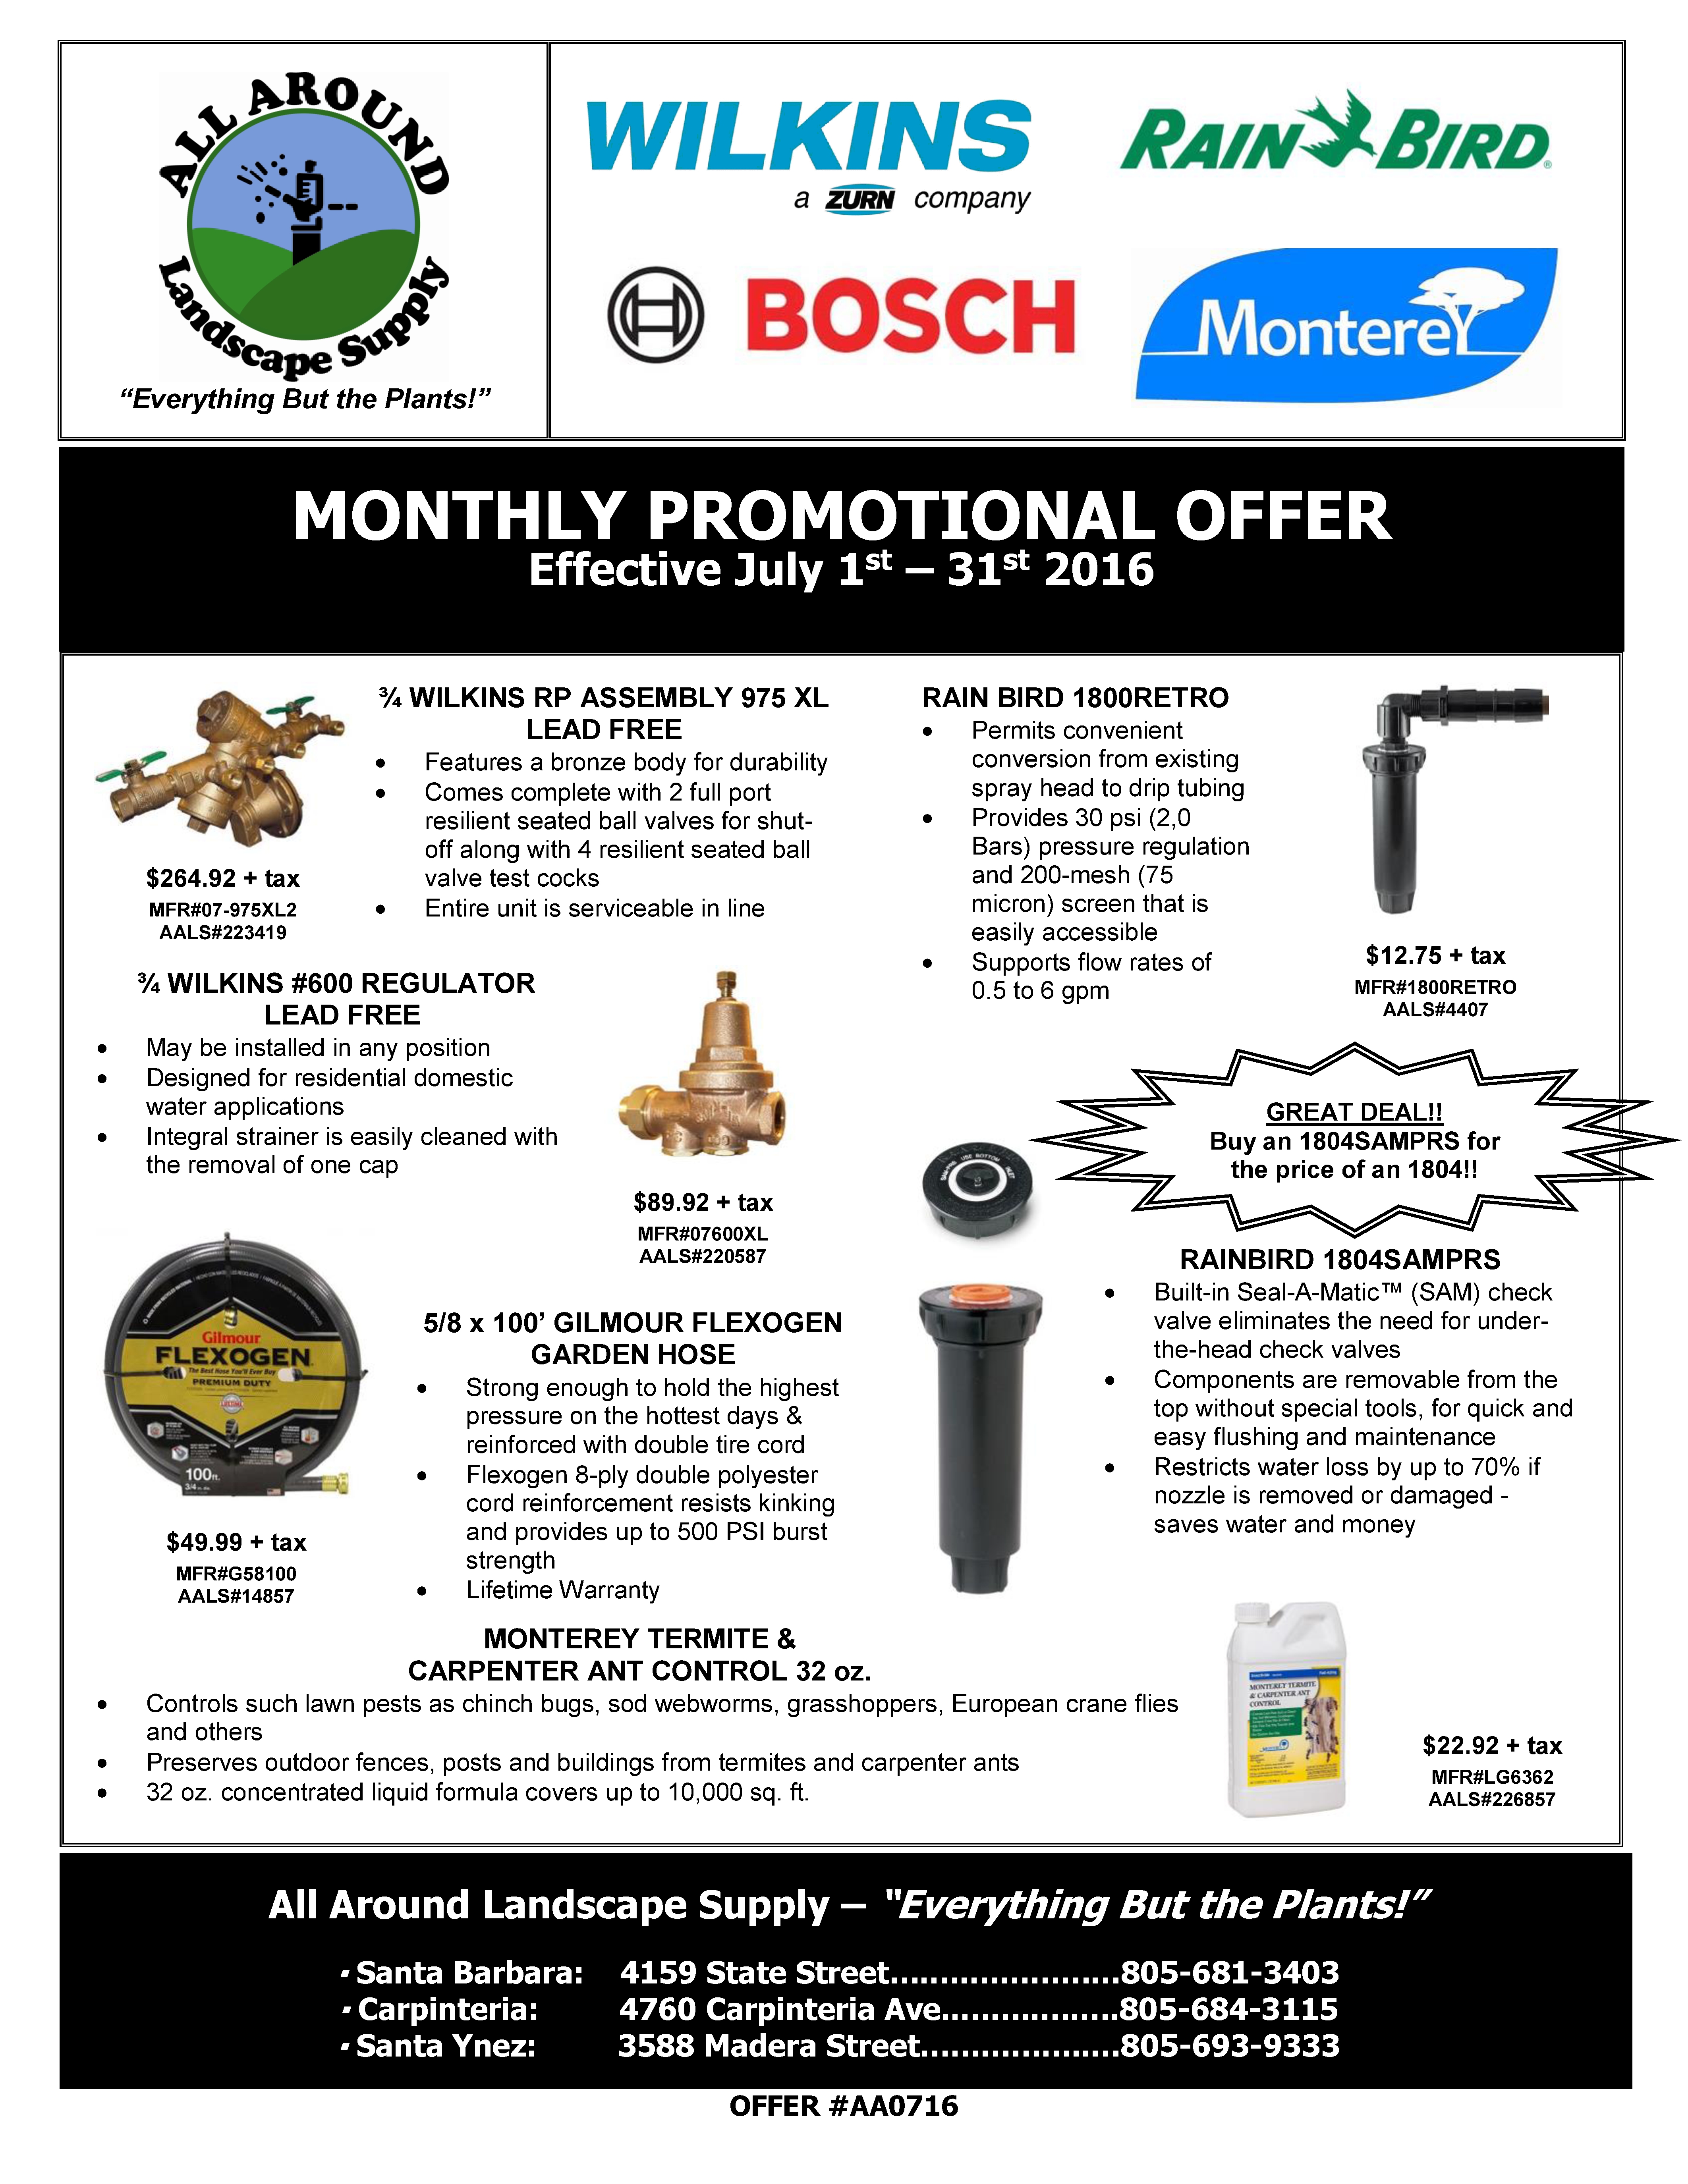 All Around Landscape July 2016 Promotions